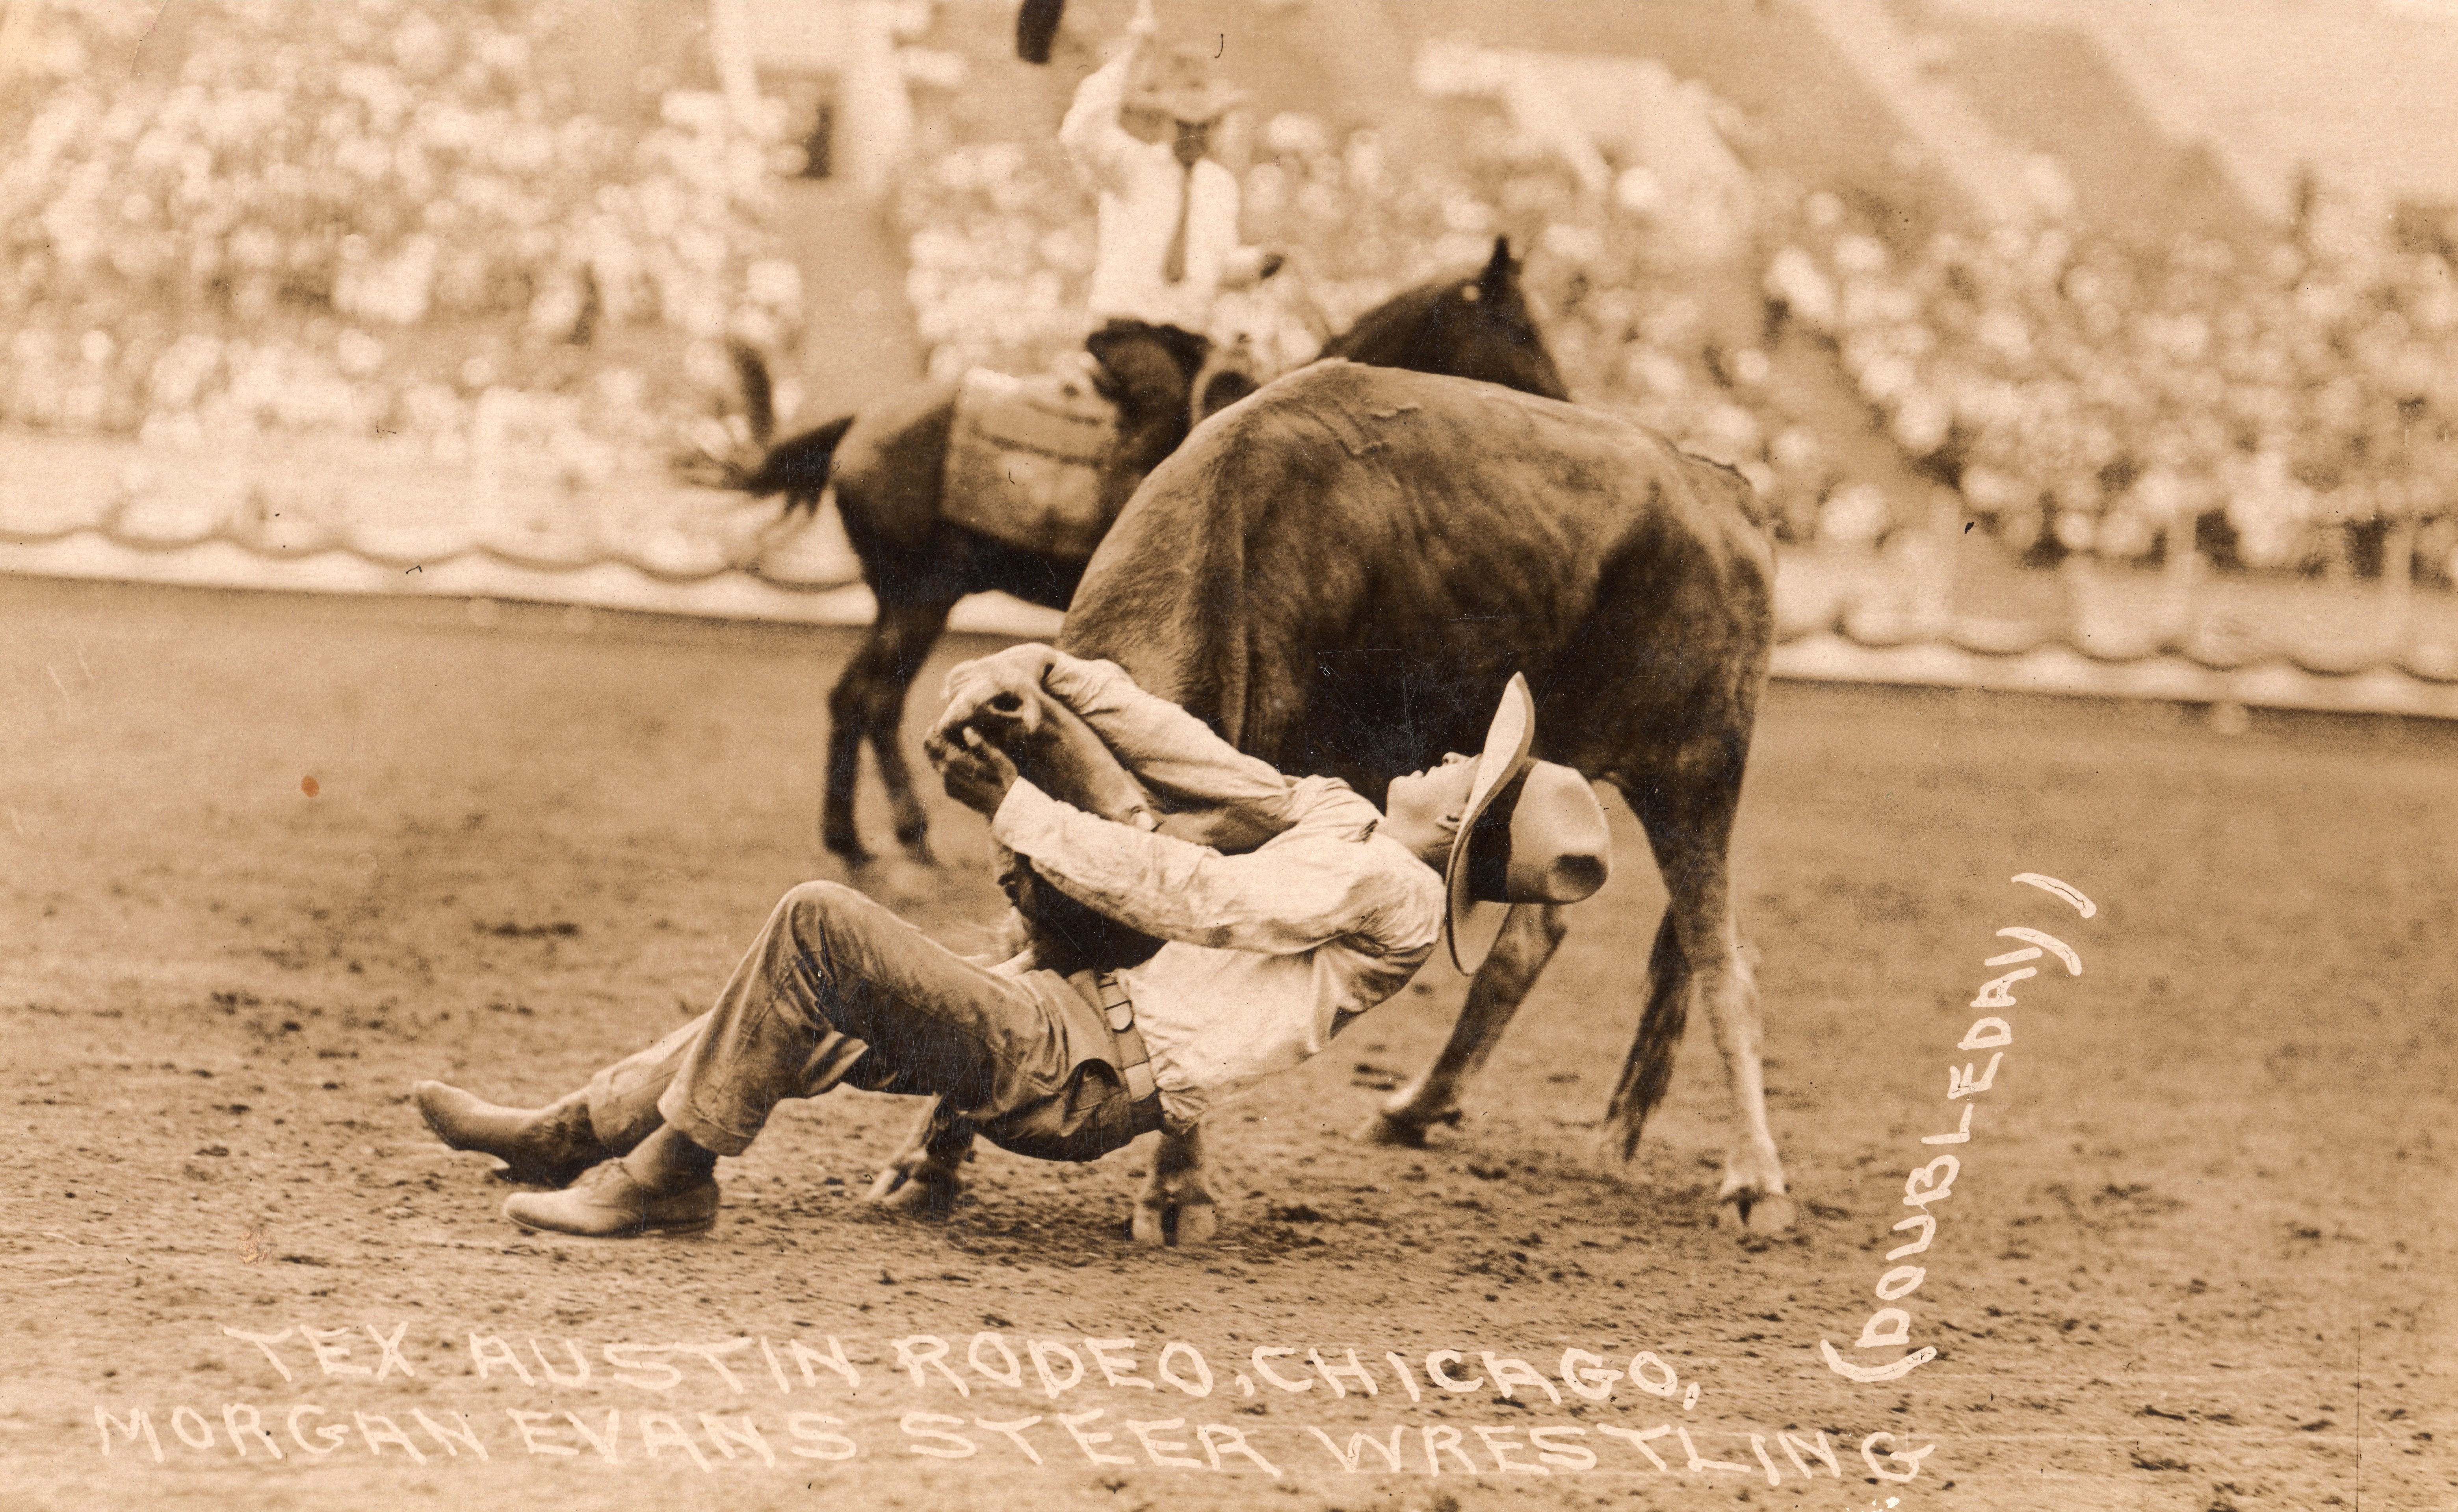 Postcard Eight Seconds Western Rodeo Steer Riding Cowboy on Bucking Bull 8 